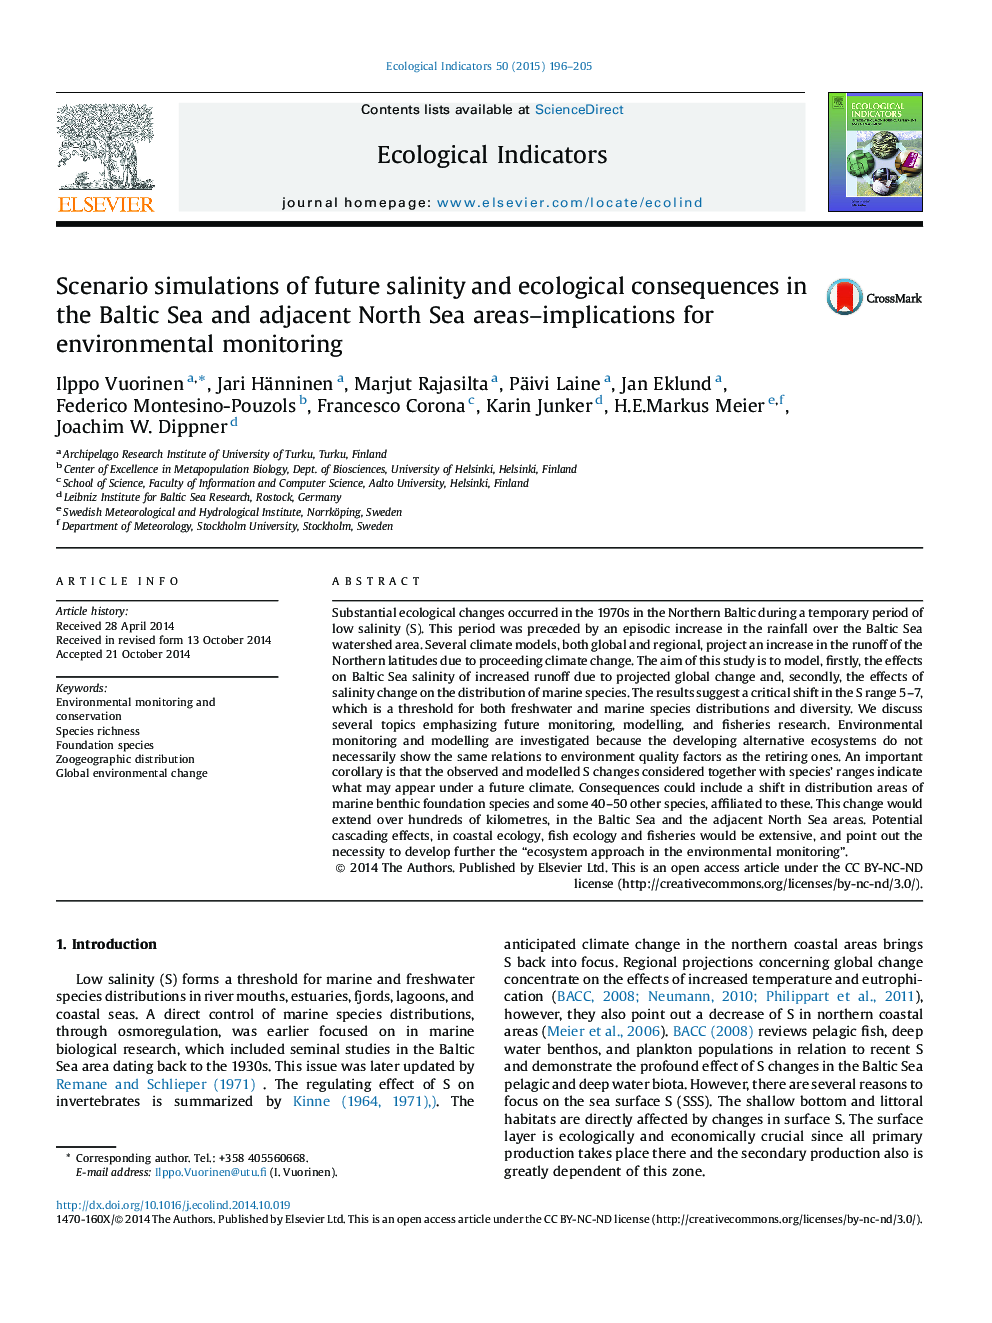 Scenario simulations of future salinity and ecological consequences in the Baltic Sea and adjacent North Sea areas-implications for environmental monitoring